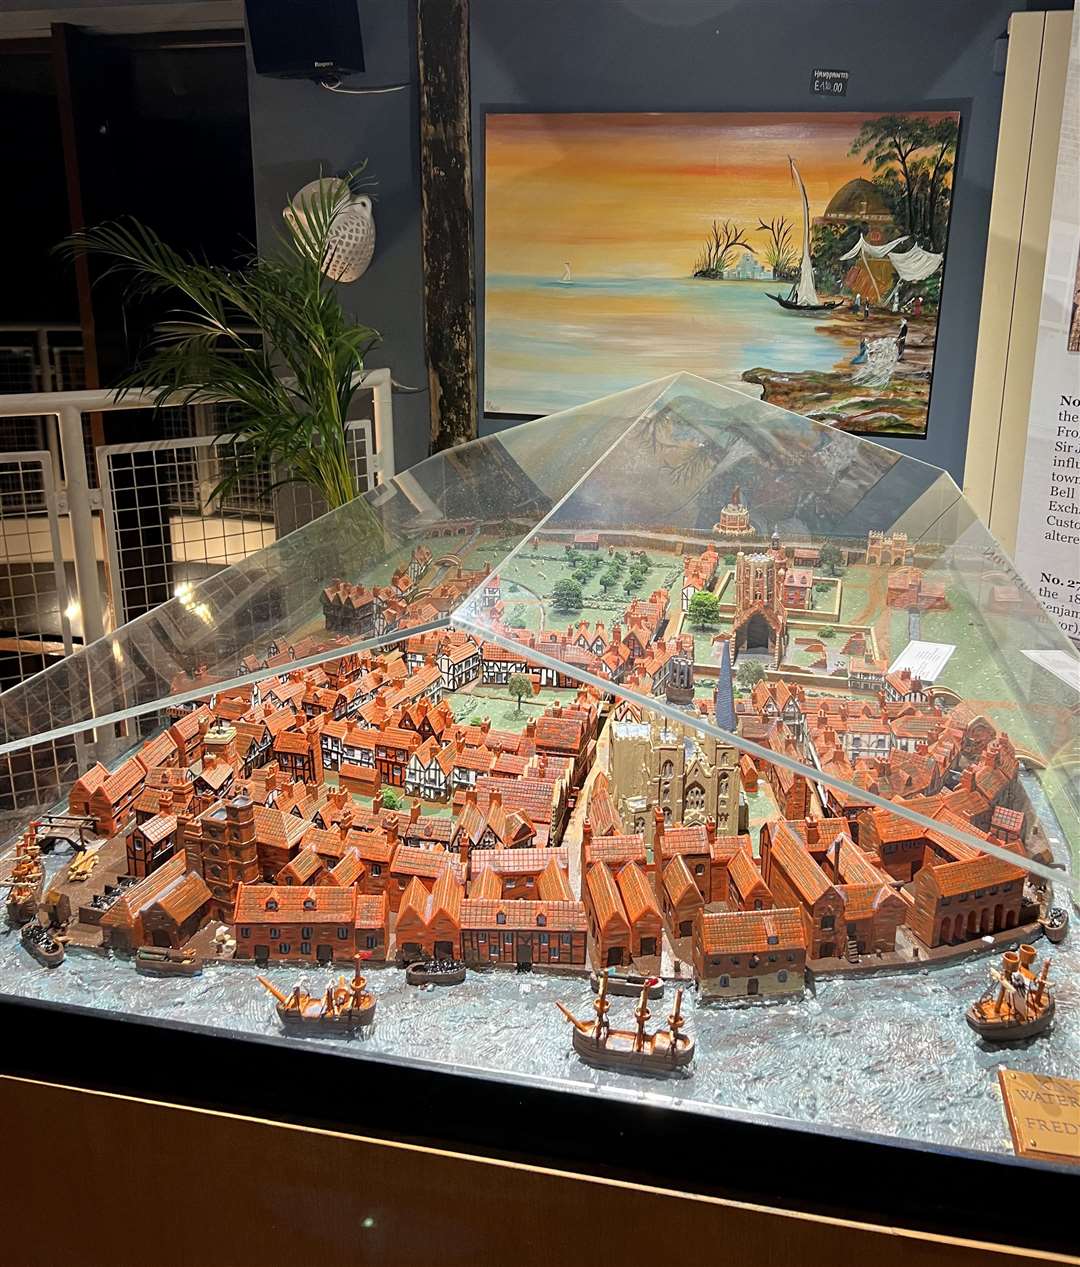 A model of King's Lynn waterfront as it would have been in 1603 by Frederick Hall, donated to the Marriott's Warehouse Trust in 2009